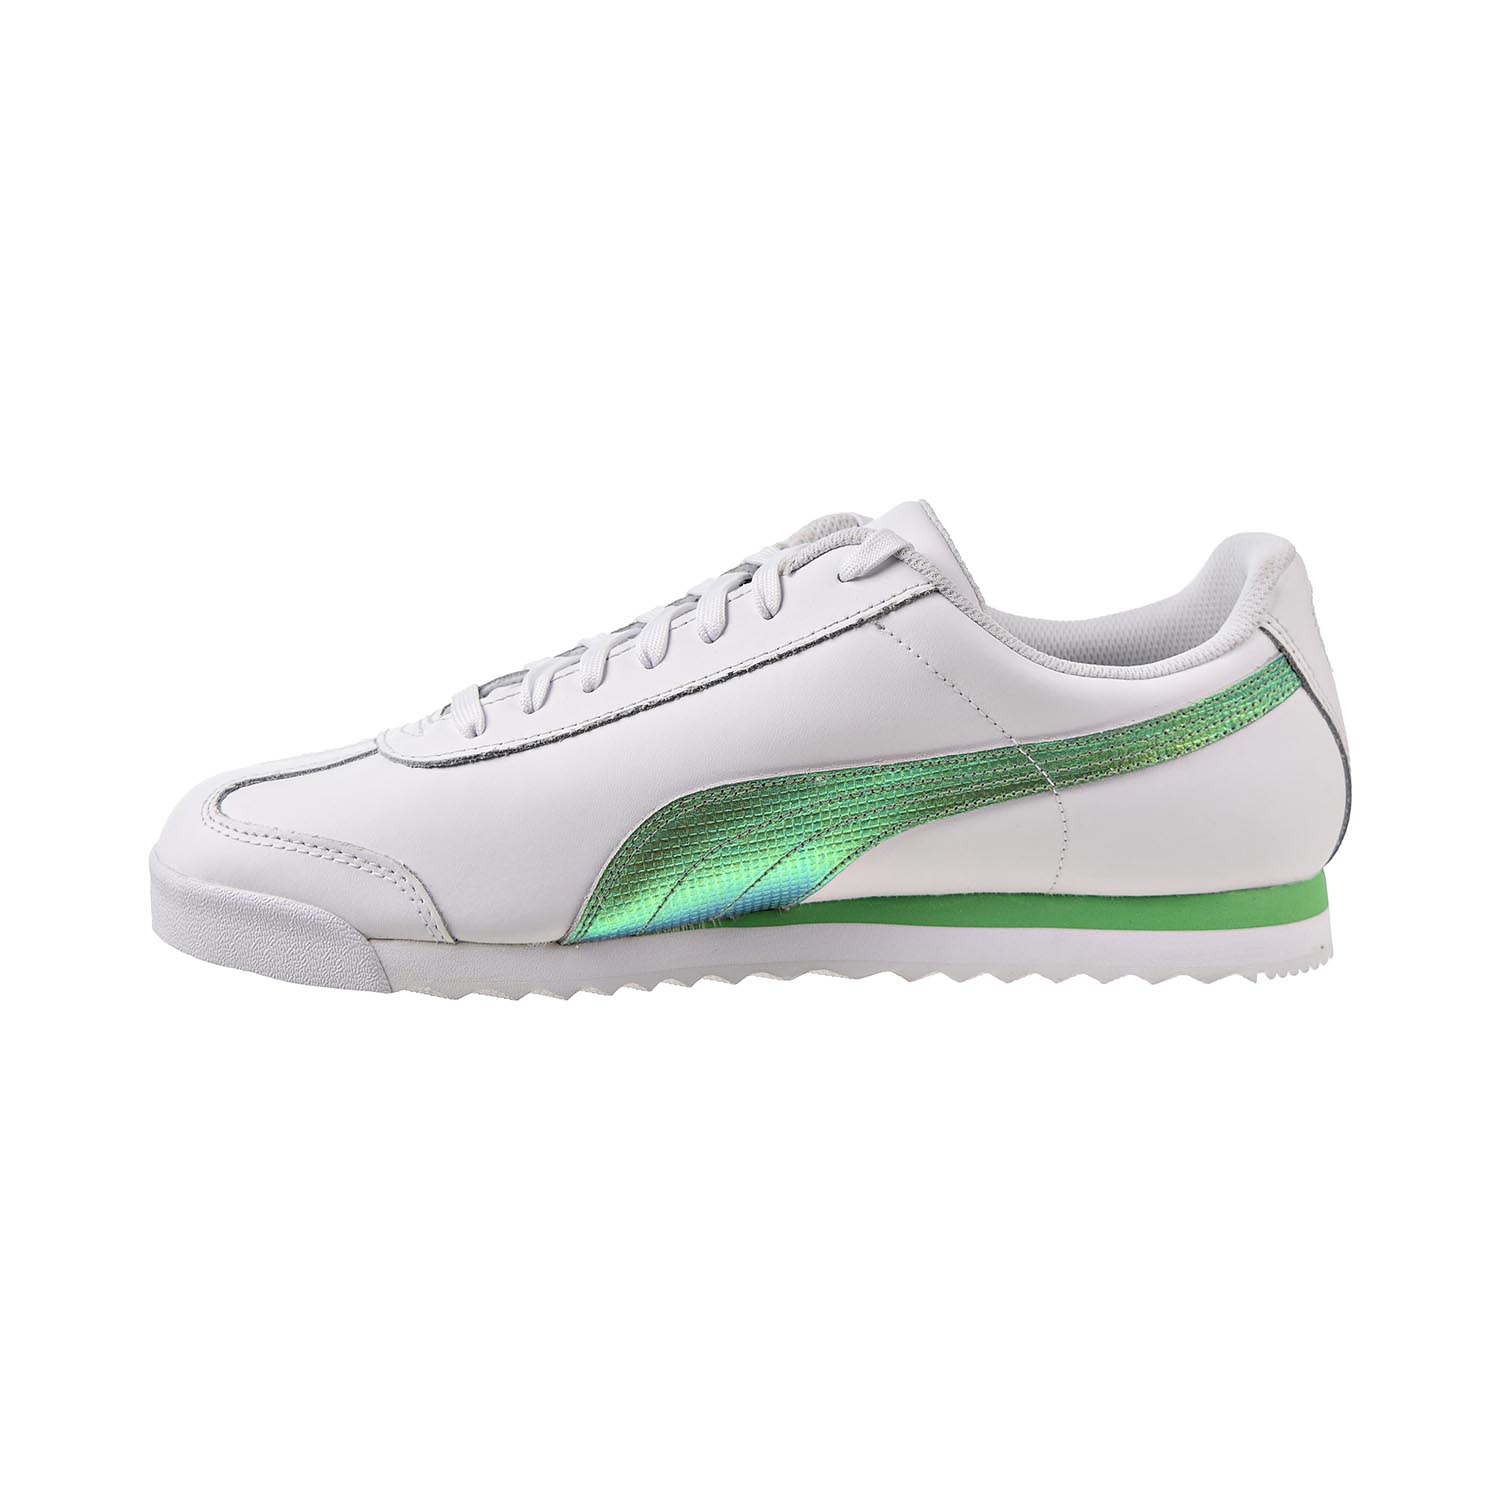 Puma Men's Roma Basic Holo White / Green Gecko Ankle-High Leather Fashion Sneaker - 11.5M - image 4 of 6